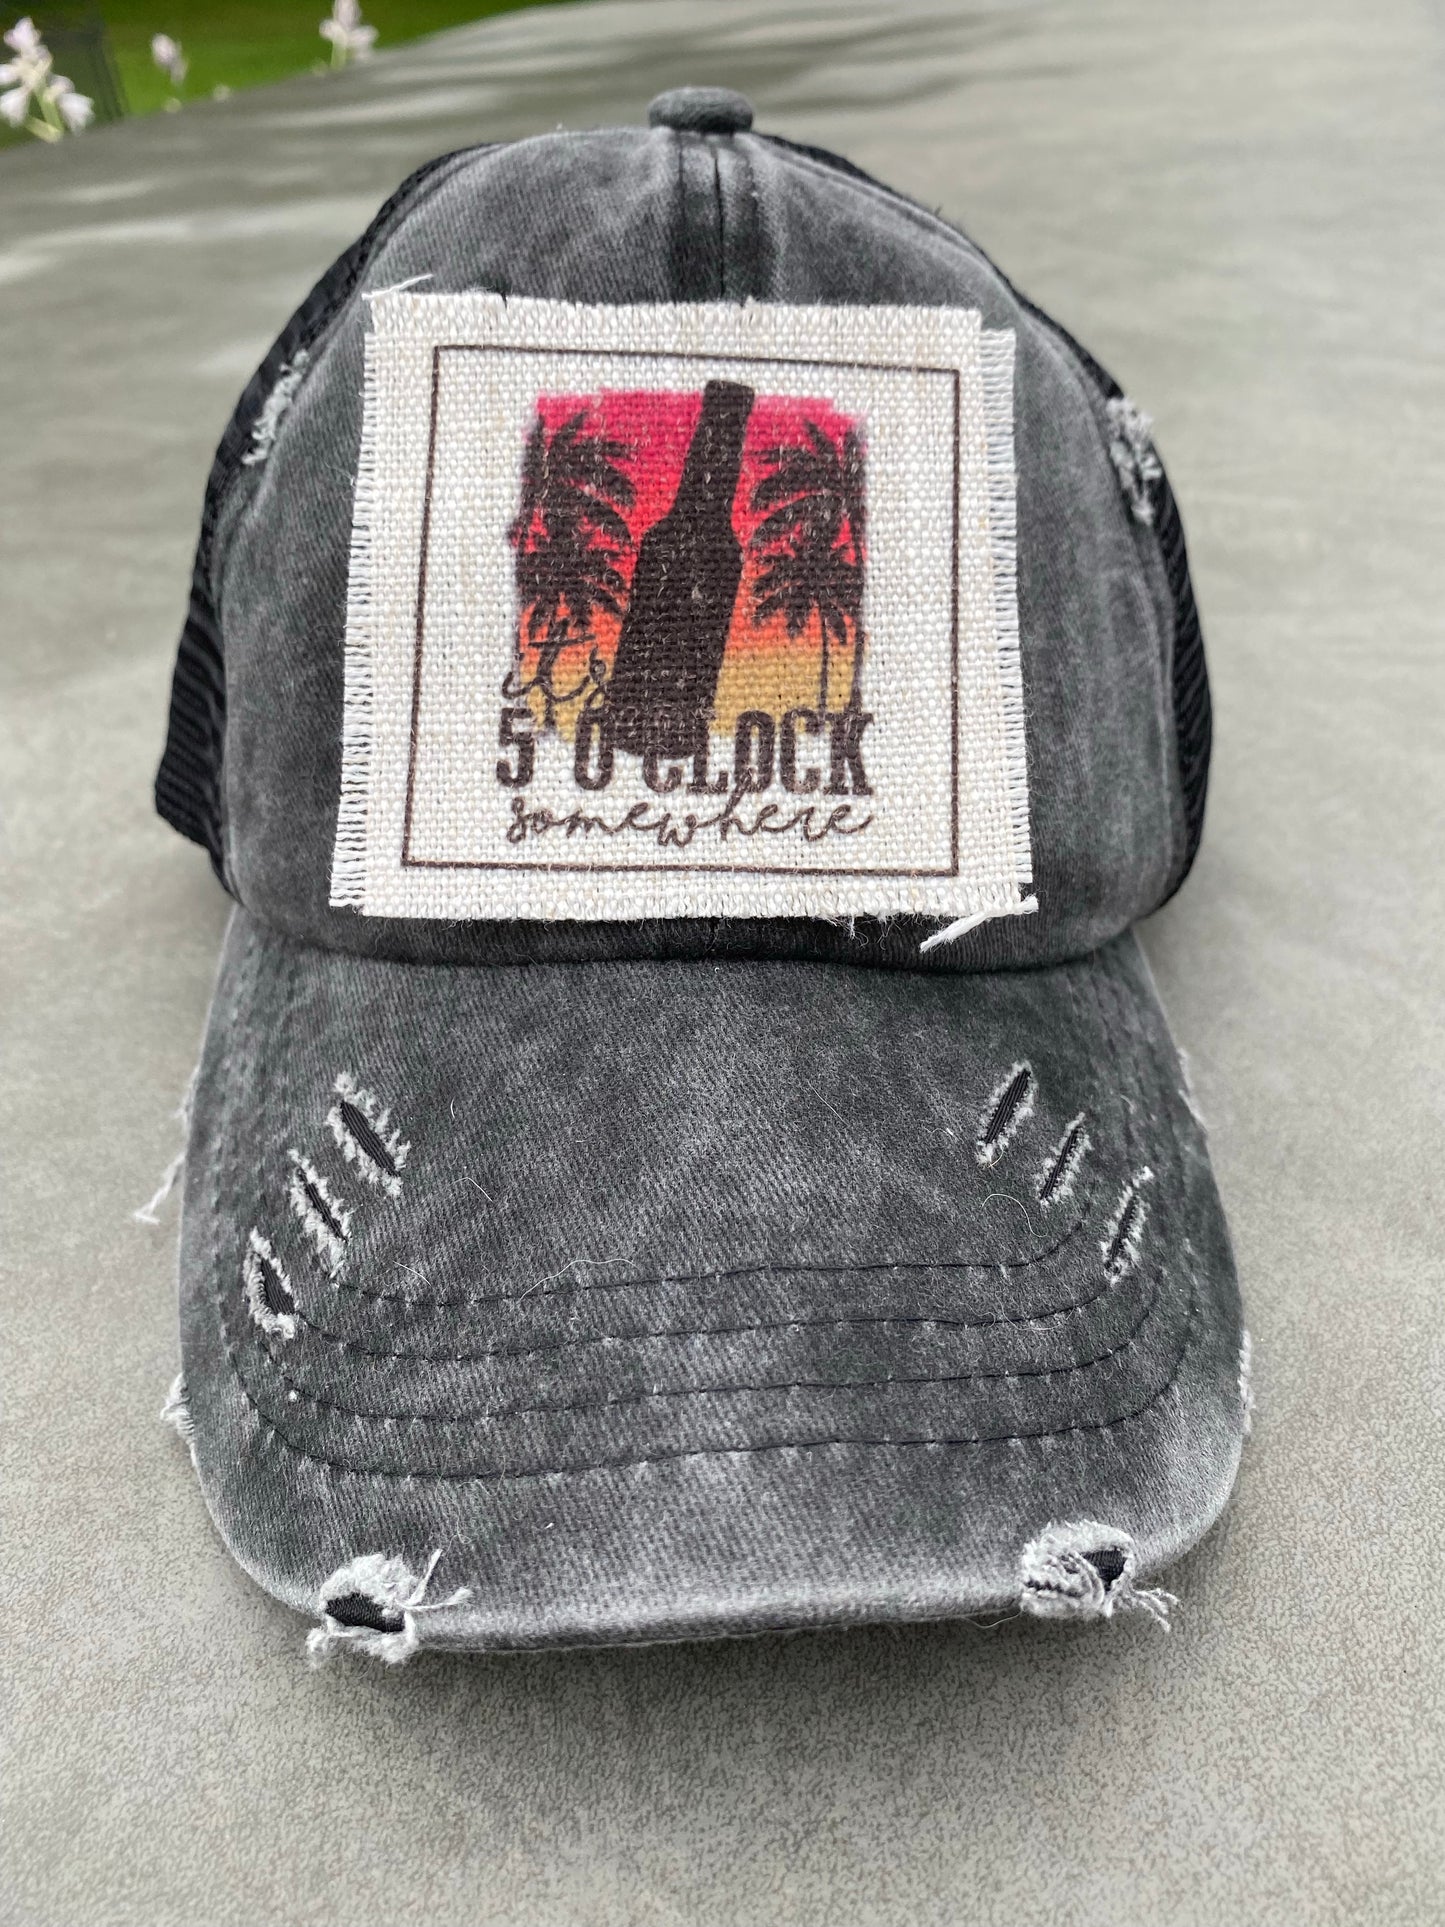 It's 5 O'clock Somewhere Hat Patch